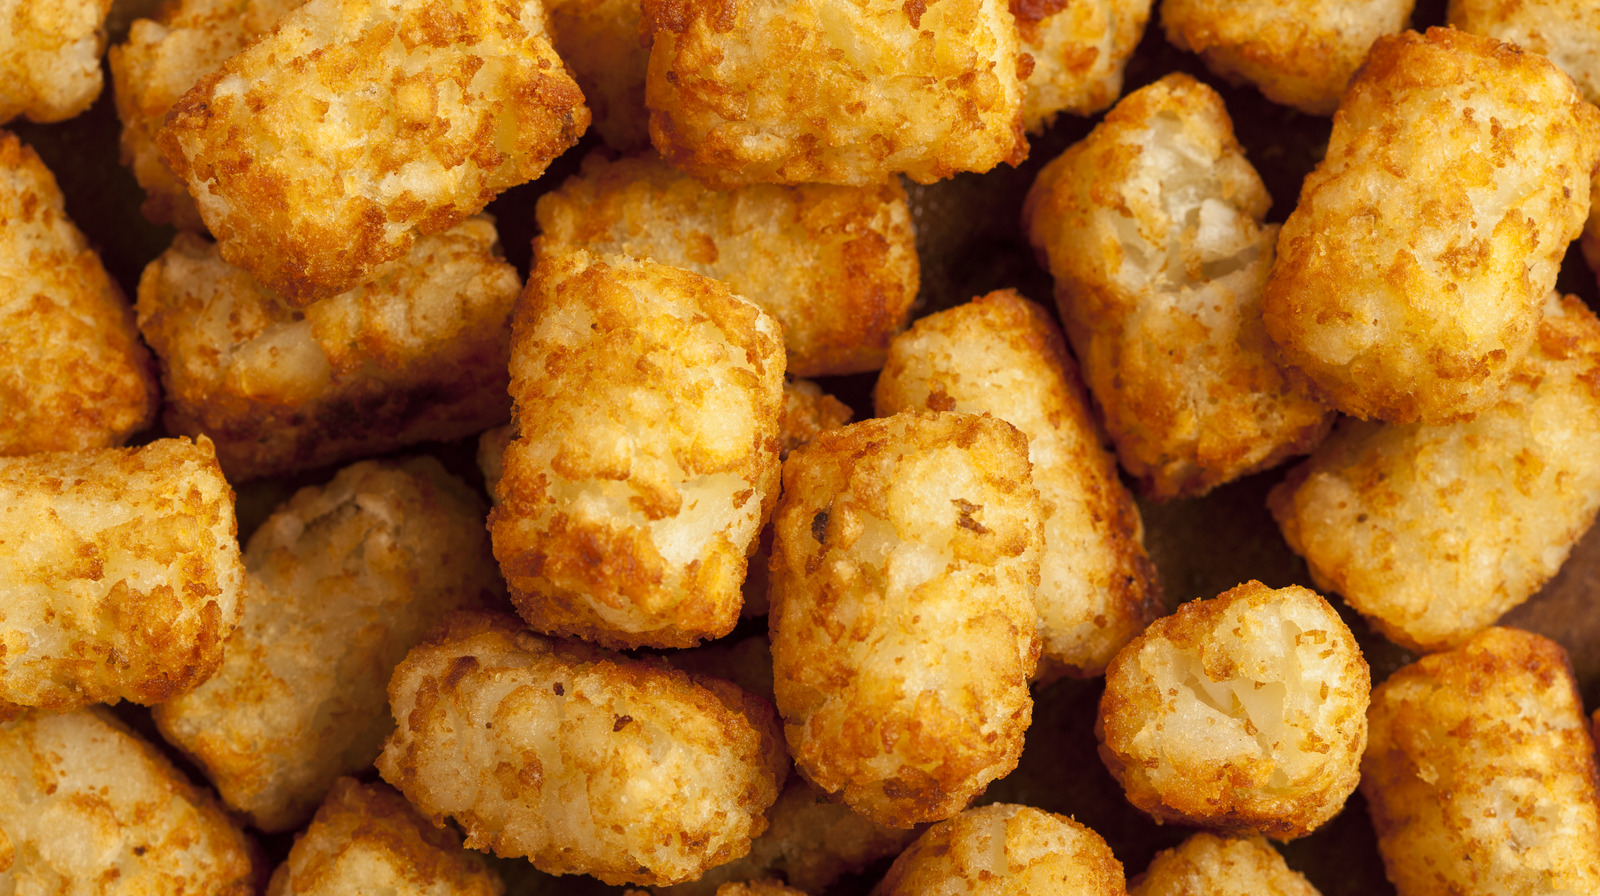 https://www.foodrepublic.com/img/gallery/12-delicious-hacks-for-a-bag-of-frozen-tater-tots/l-intro-1695839729.jpg